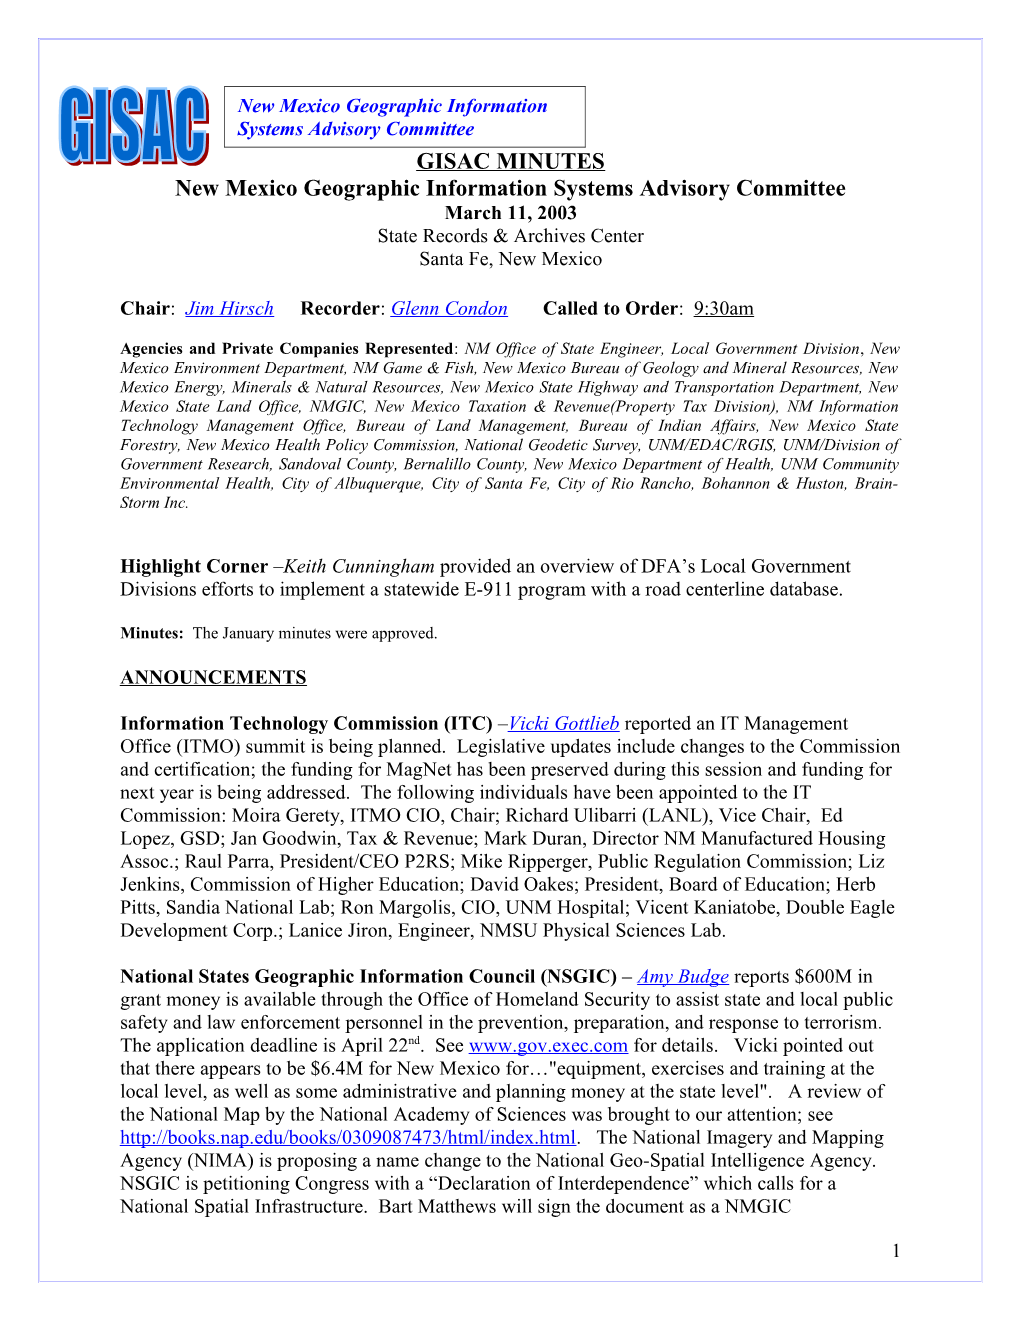 New Mexico Geographic Information System Advisory Committee